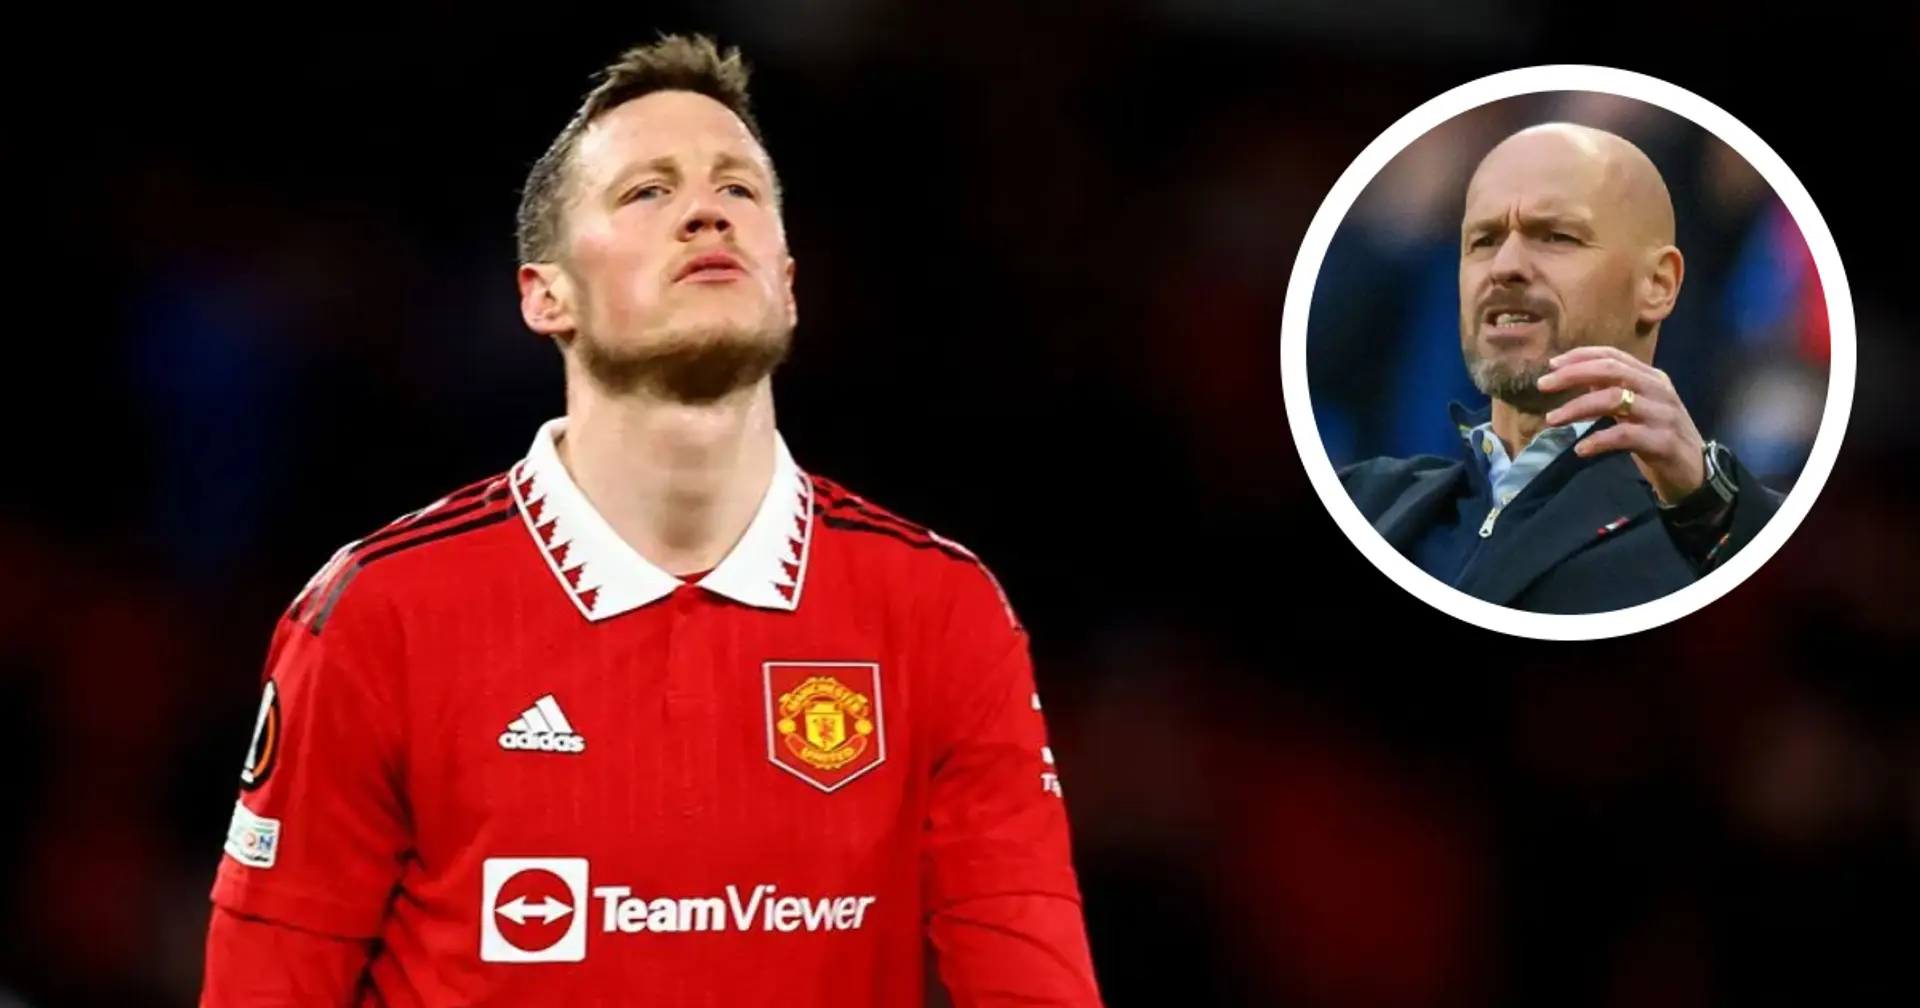 'If he wasn't Dutch he wouldn't even be at the club': Man United fans react to Weghorst's performance at Spurs